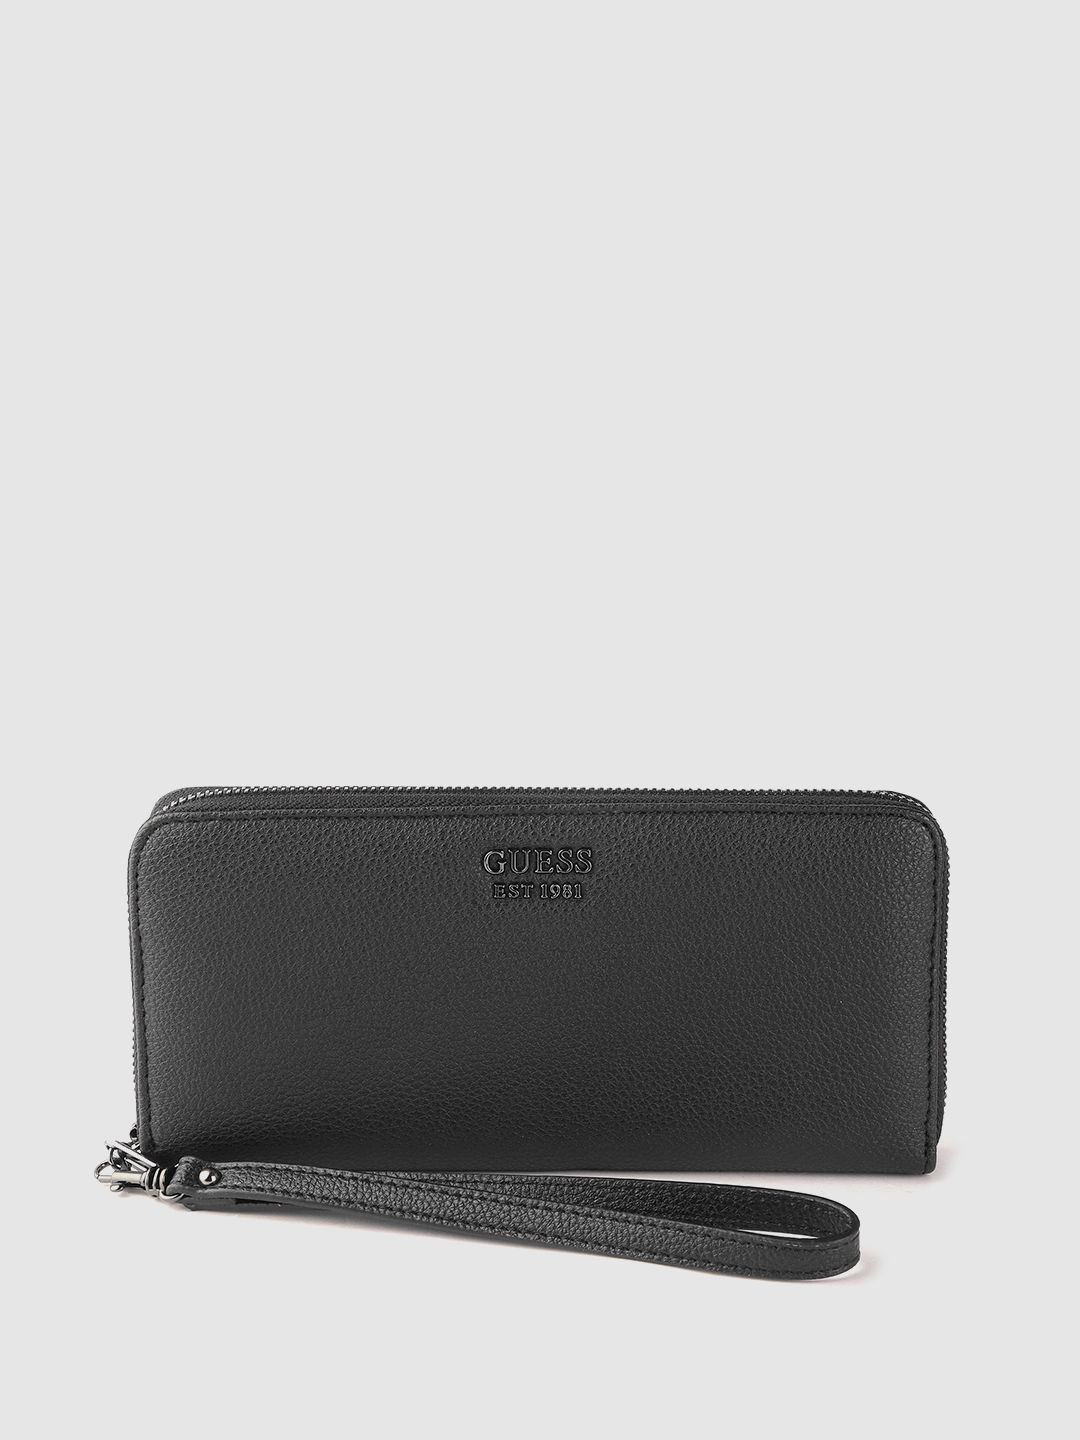 GUESS Women Black Solid Zip Around Wallet with Wrist Loop Price in India